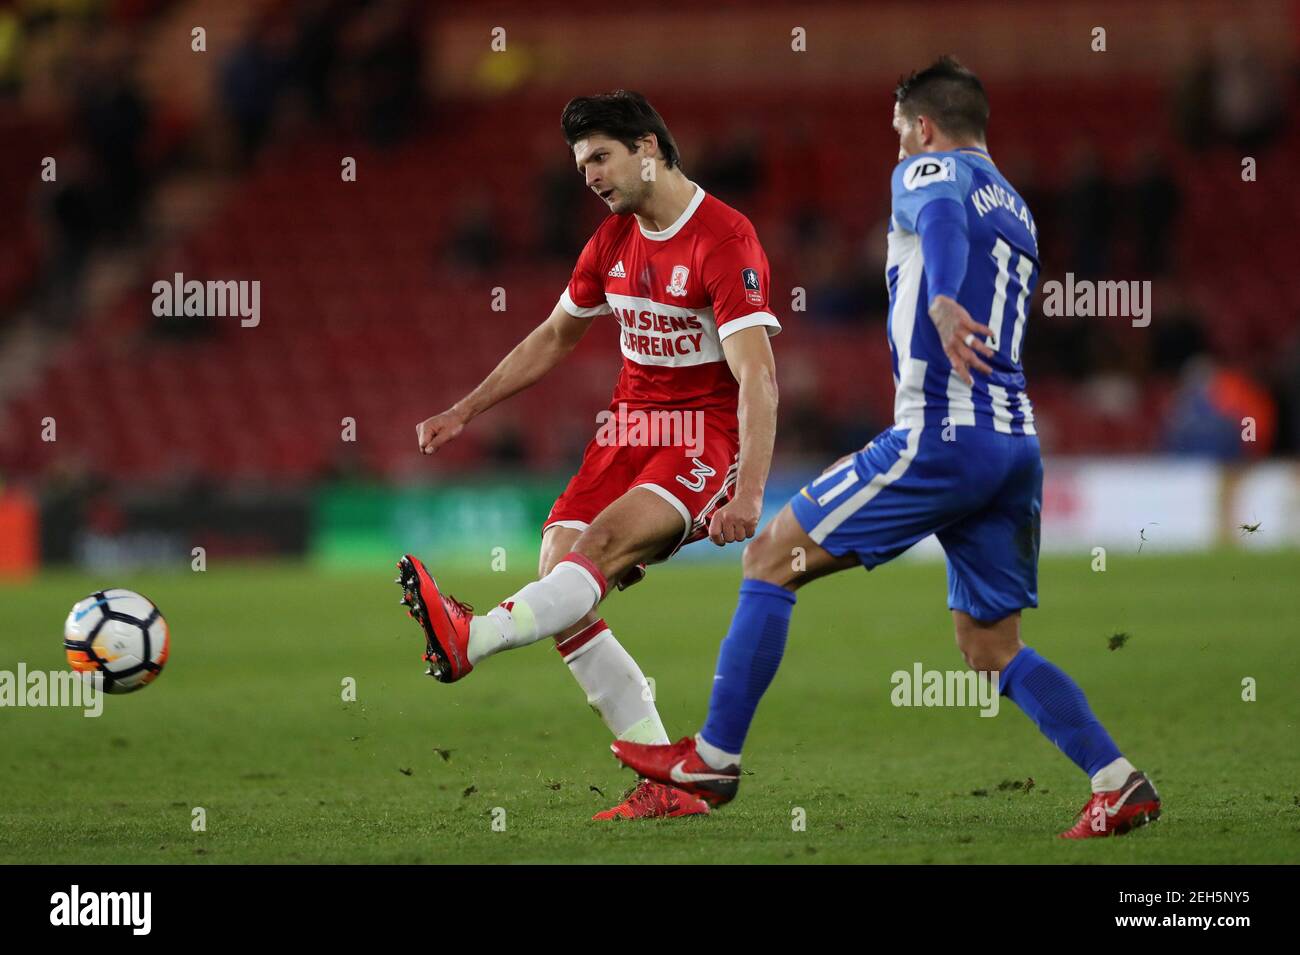 Soccer Football - FA Cup Fourth Round - Middlesbrough vs Brighton & Hove Albion - Riverside Stadium, Middlesbrough, Britain - January 27, 2018   Middlesbrough's George Friend in action with Brighton's Anthony Knockaert   REUTERS/Scott Heppell Stock Photo